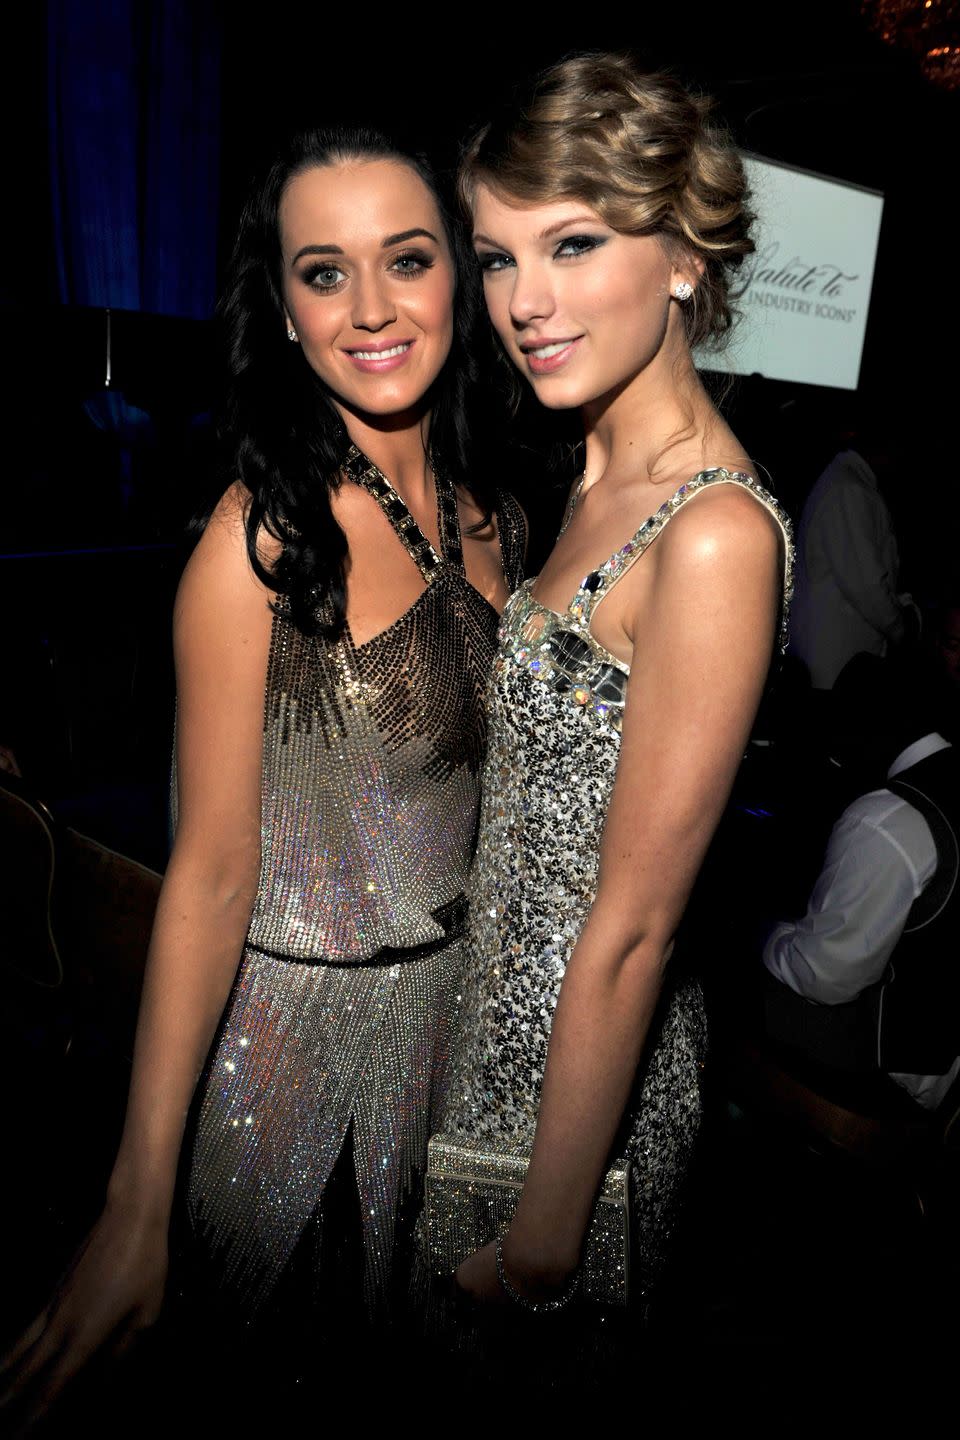 Katy Perry’ and Taylor Swift